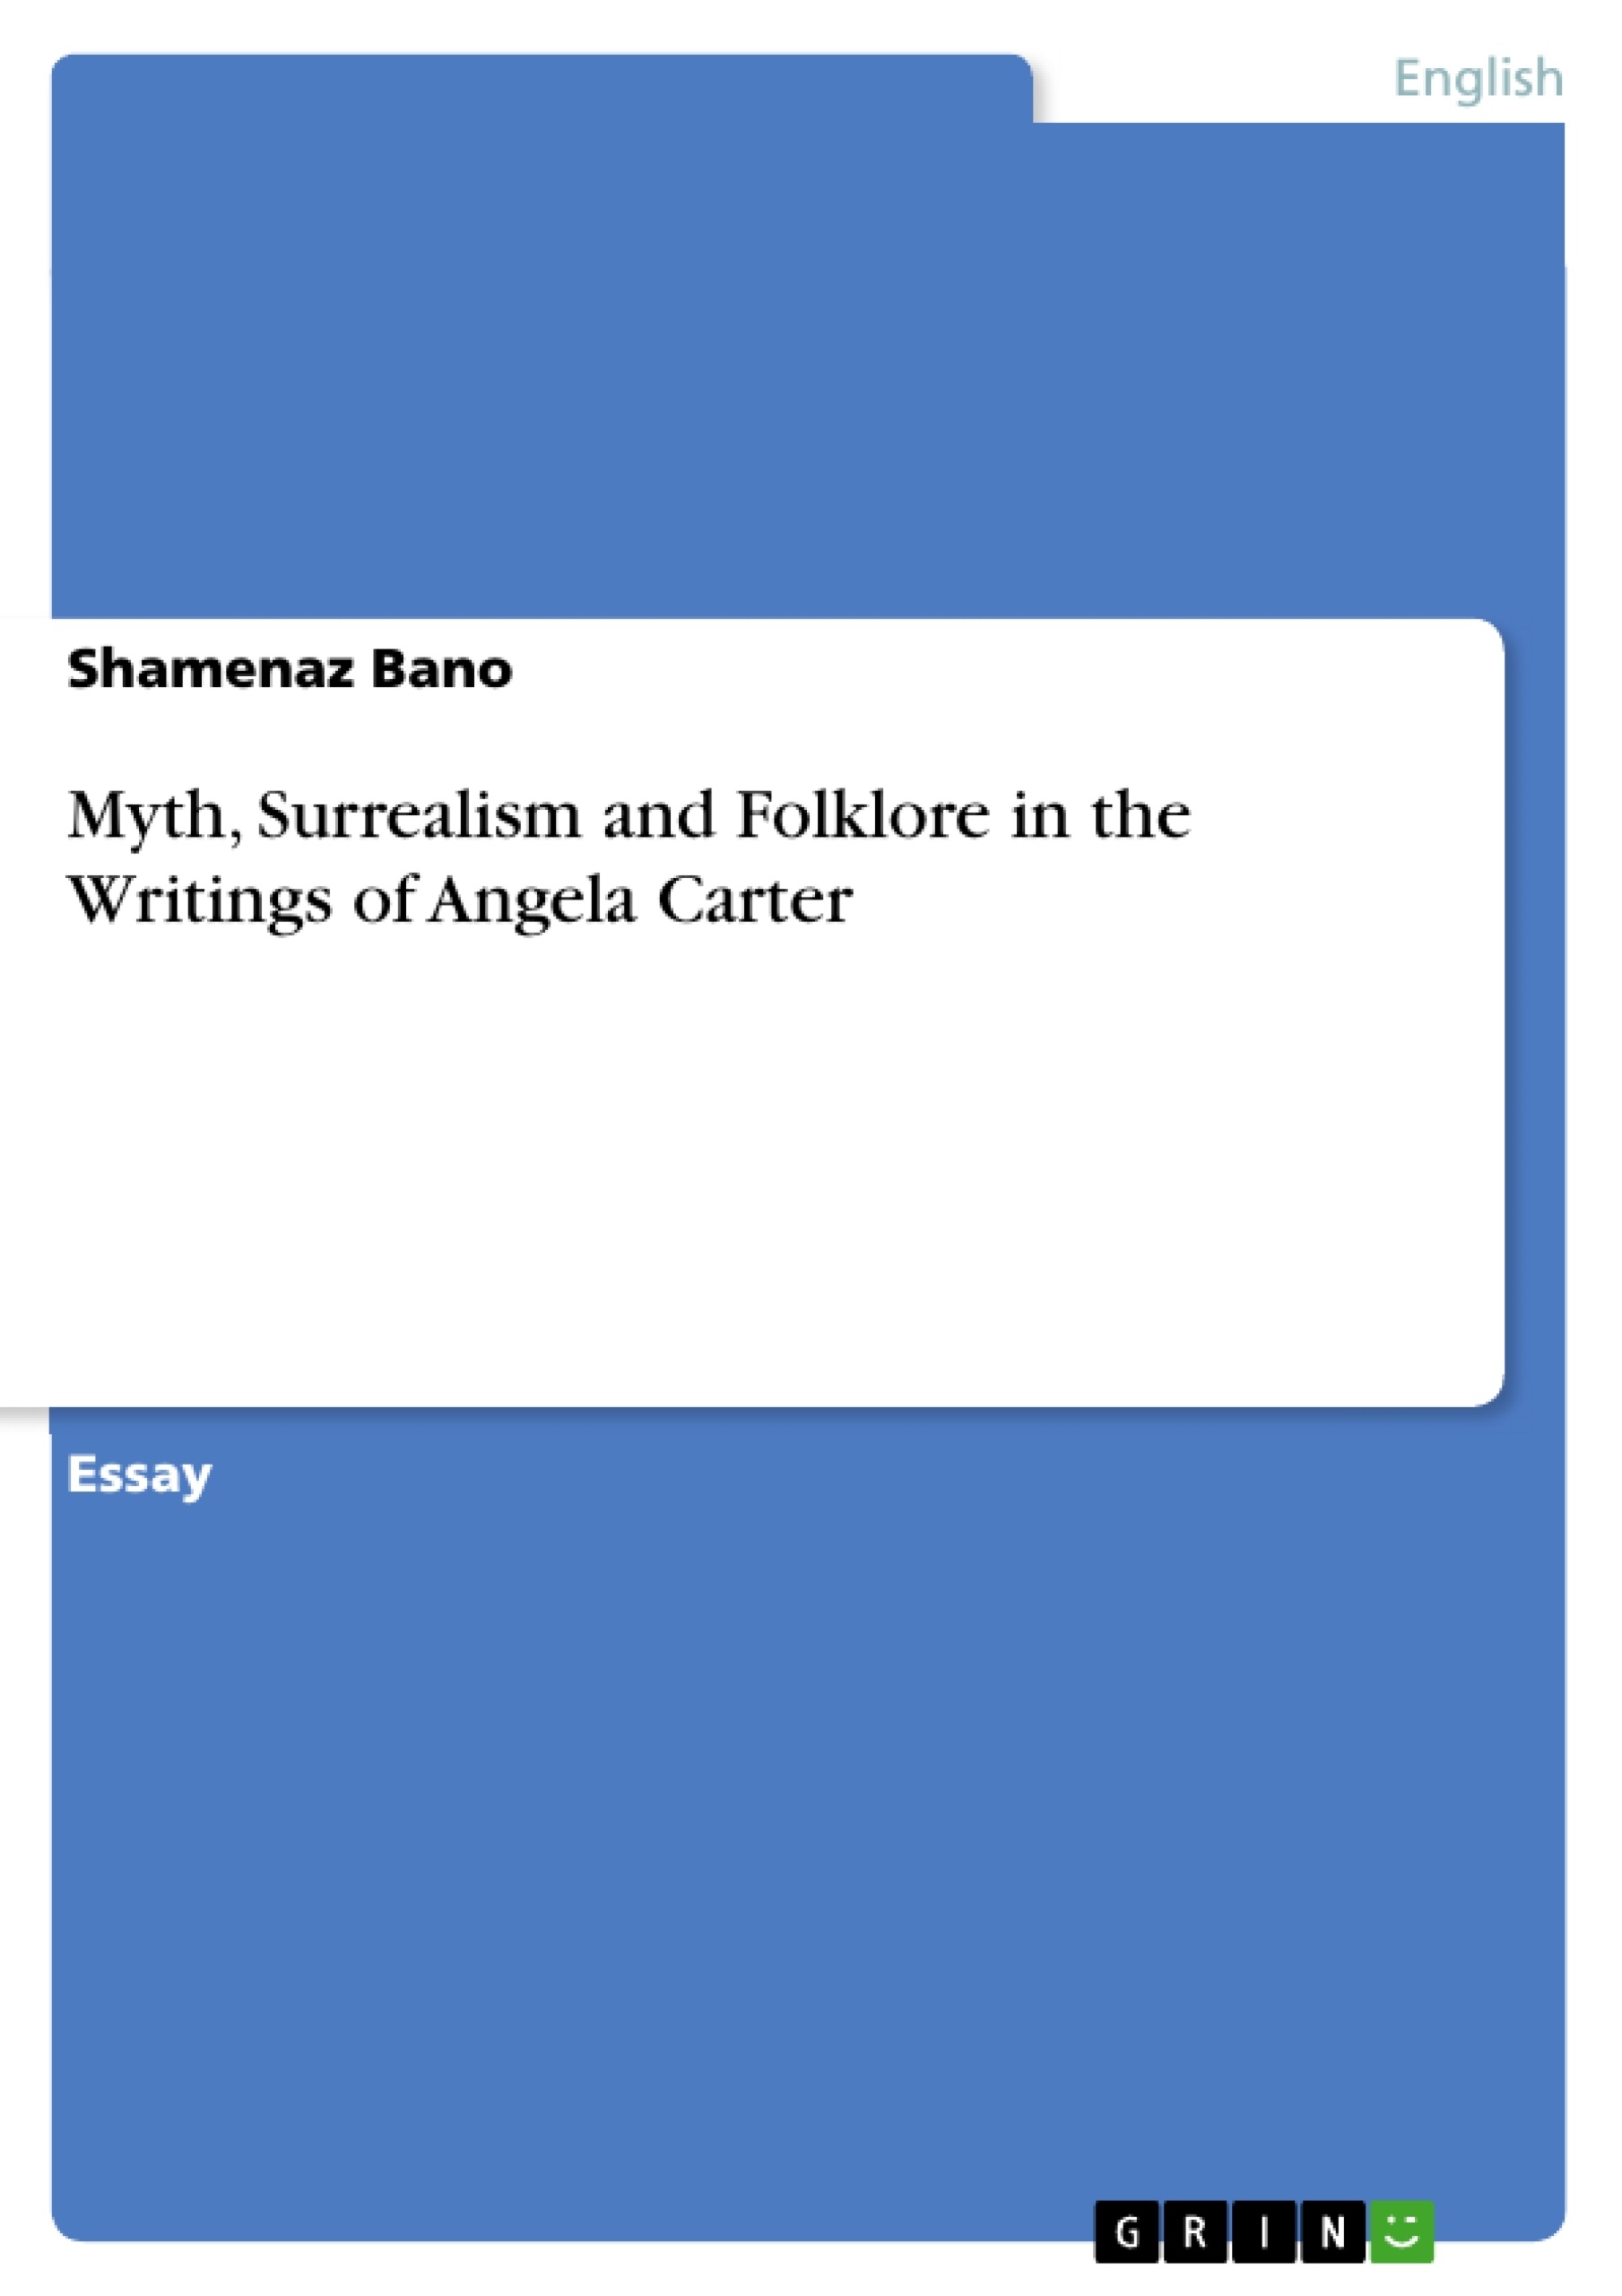 Título: Myth, Surrealism and Folklore in the Writings of Angela Carter